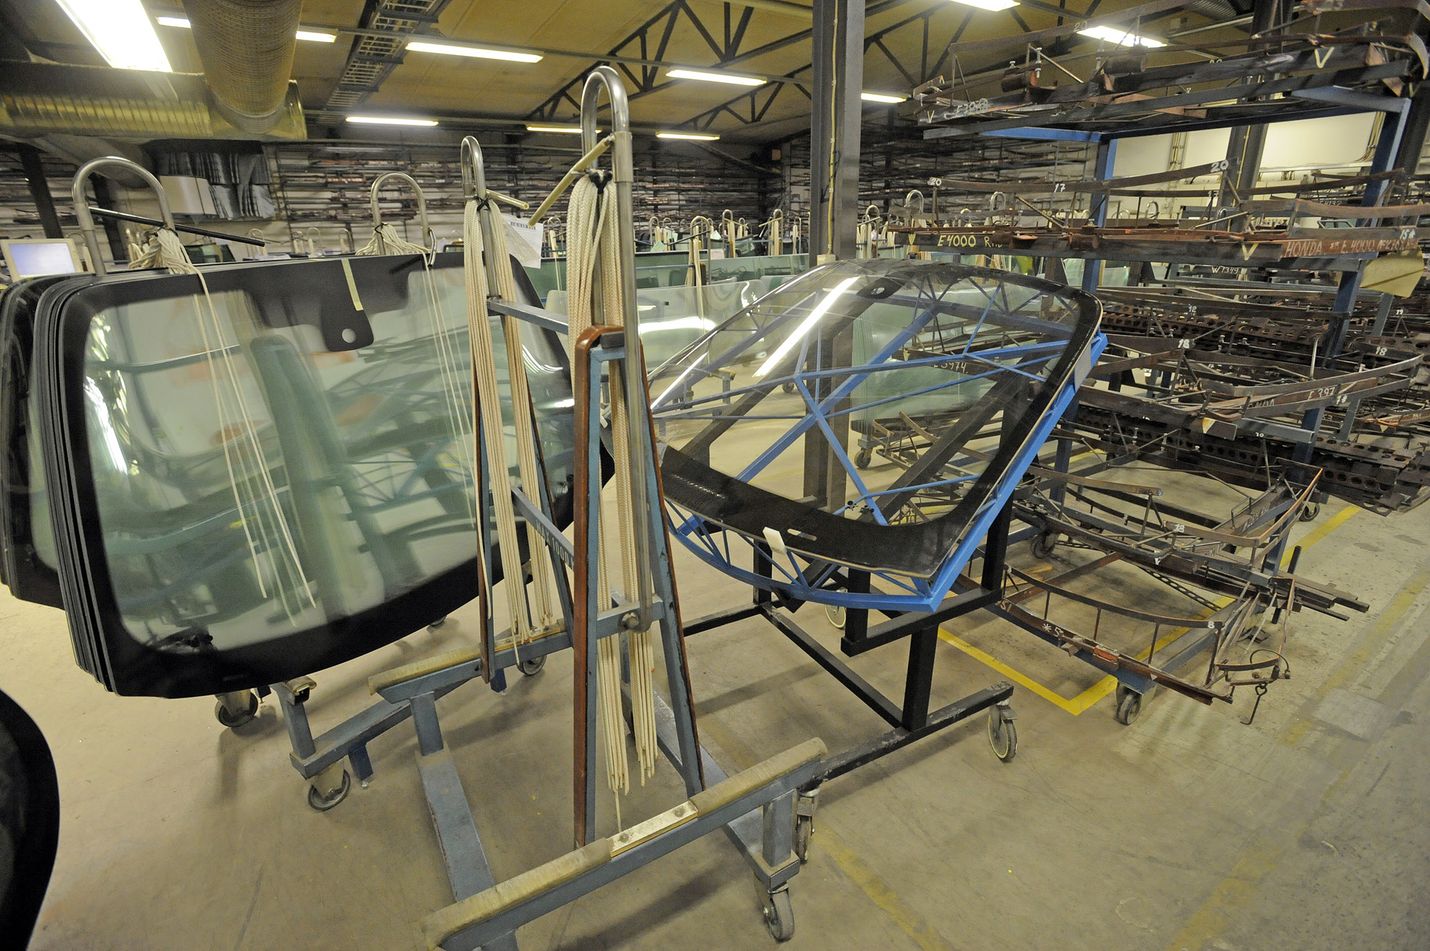 Saint-Gobain Automotive Glass Plant in Ihode Finland is coming to an end